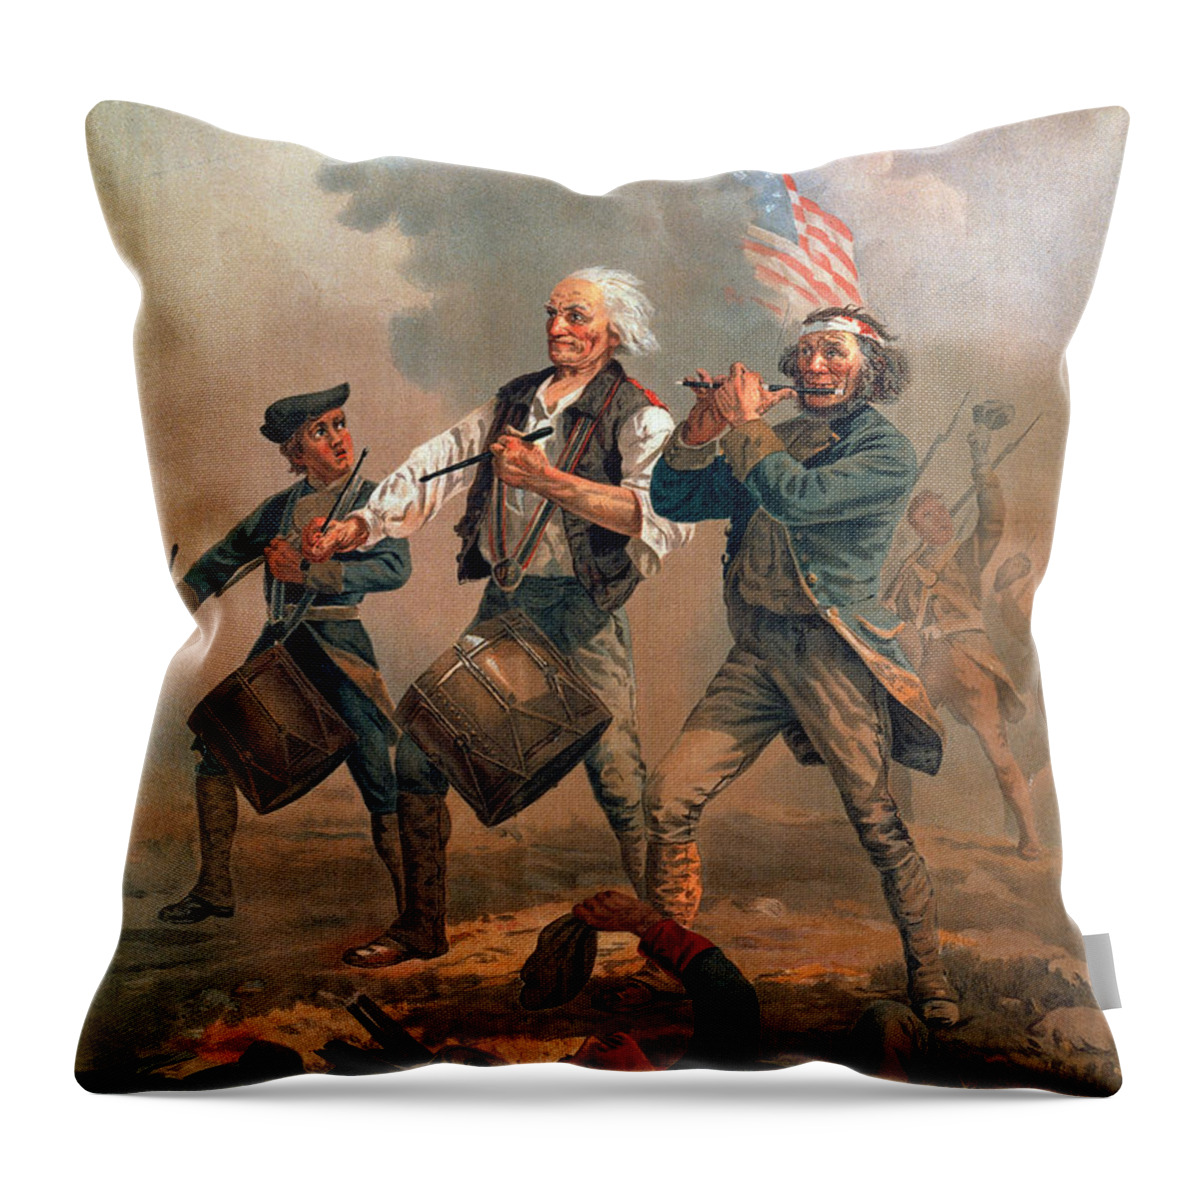 1776 Throw Pillow featuring the photograph The Spirit Of 76 by Granger